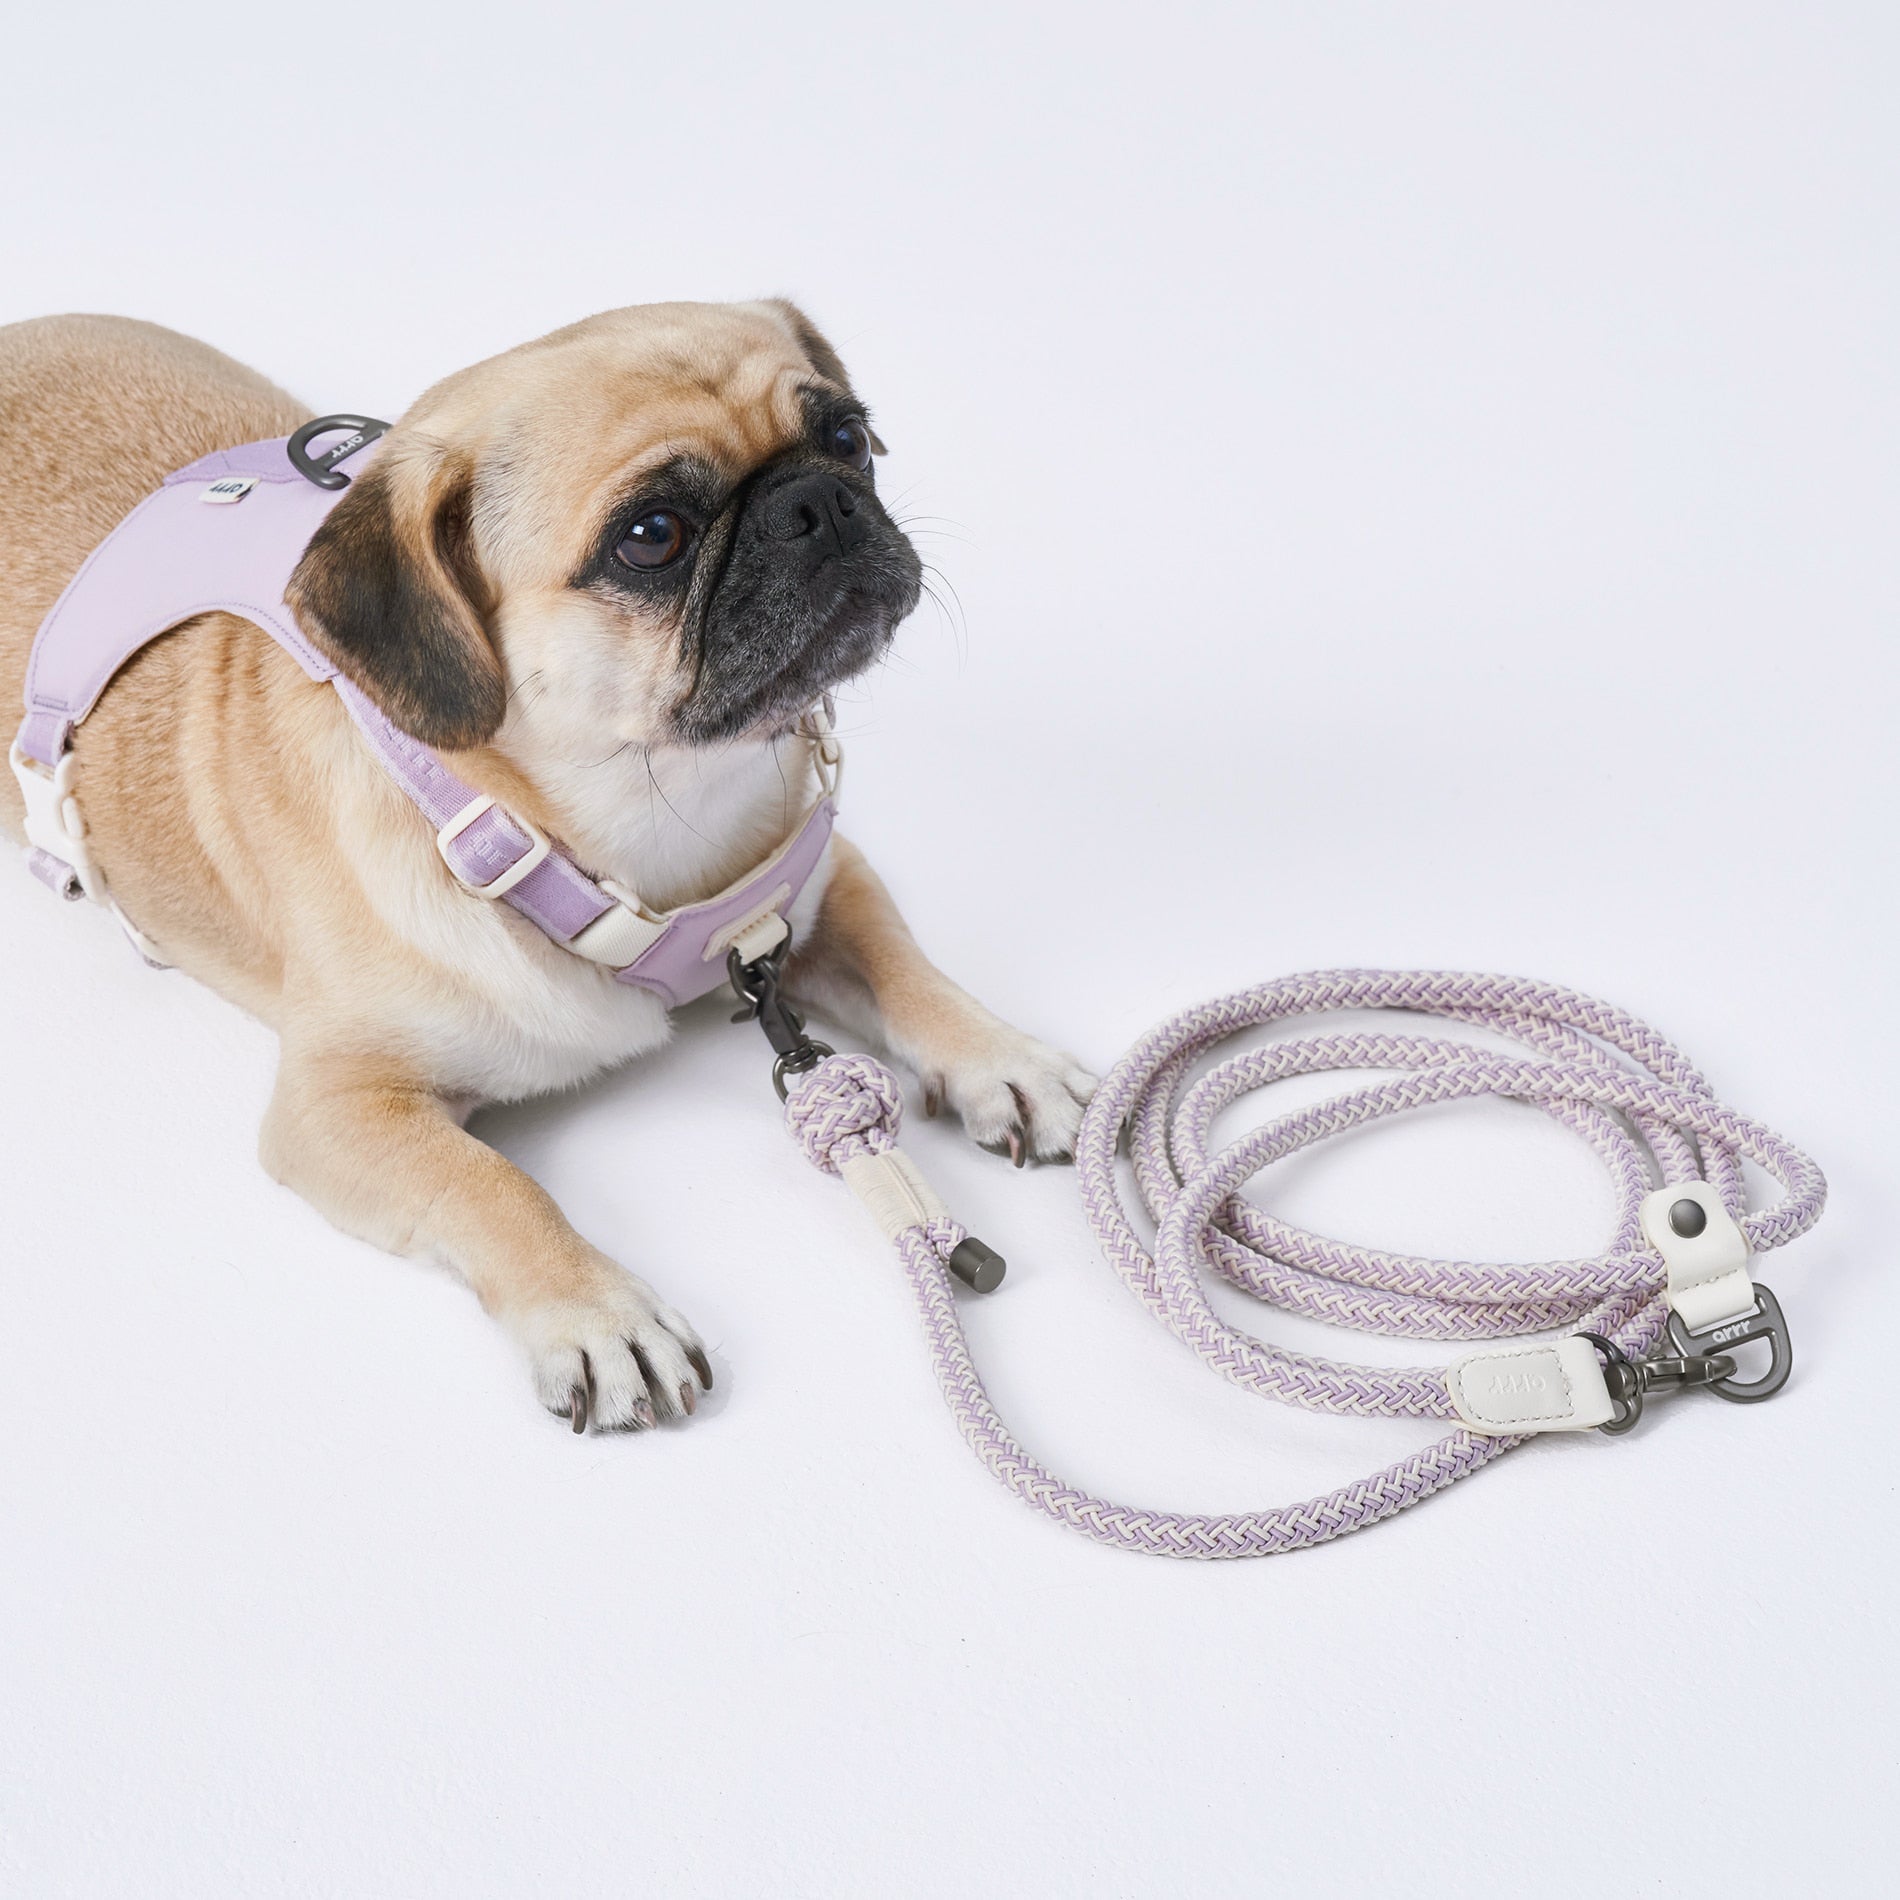 Arrr bouncing dog leash in lily lavender. Perfect holding experience with soft and flexible material. Adjustable D-ring design for better size of hand-holding or attaching to a fixed object.